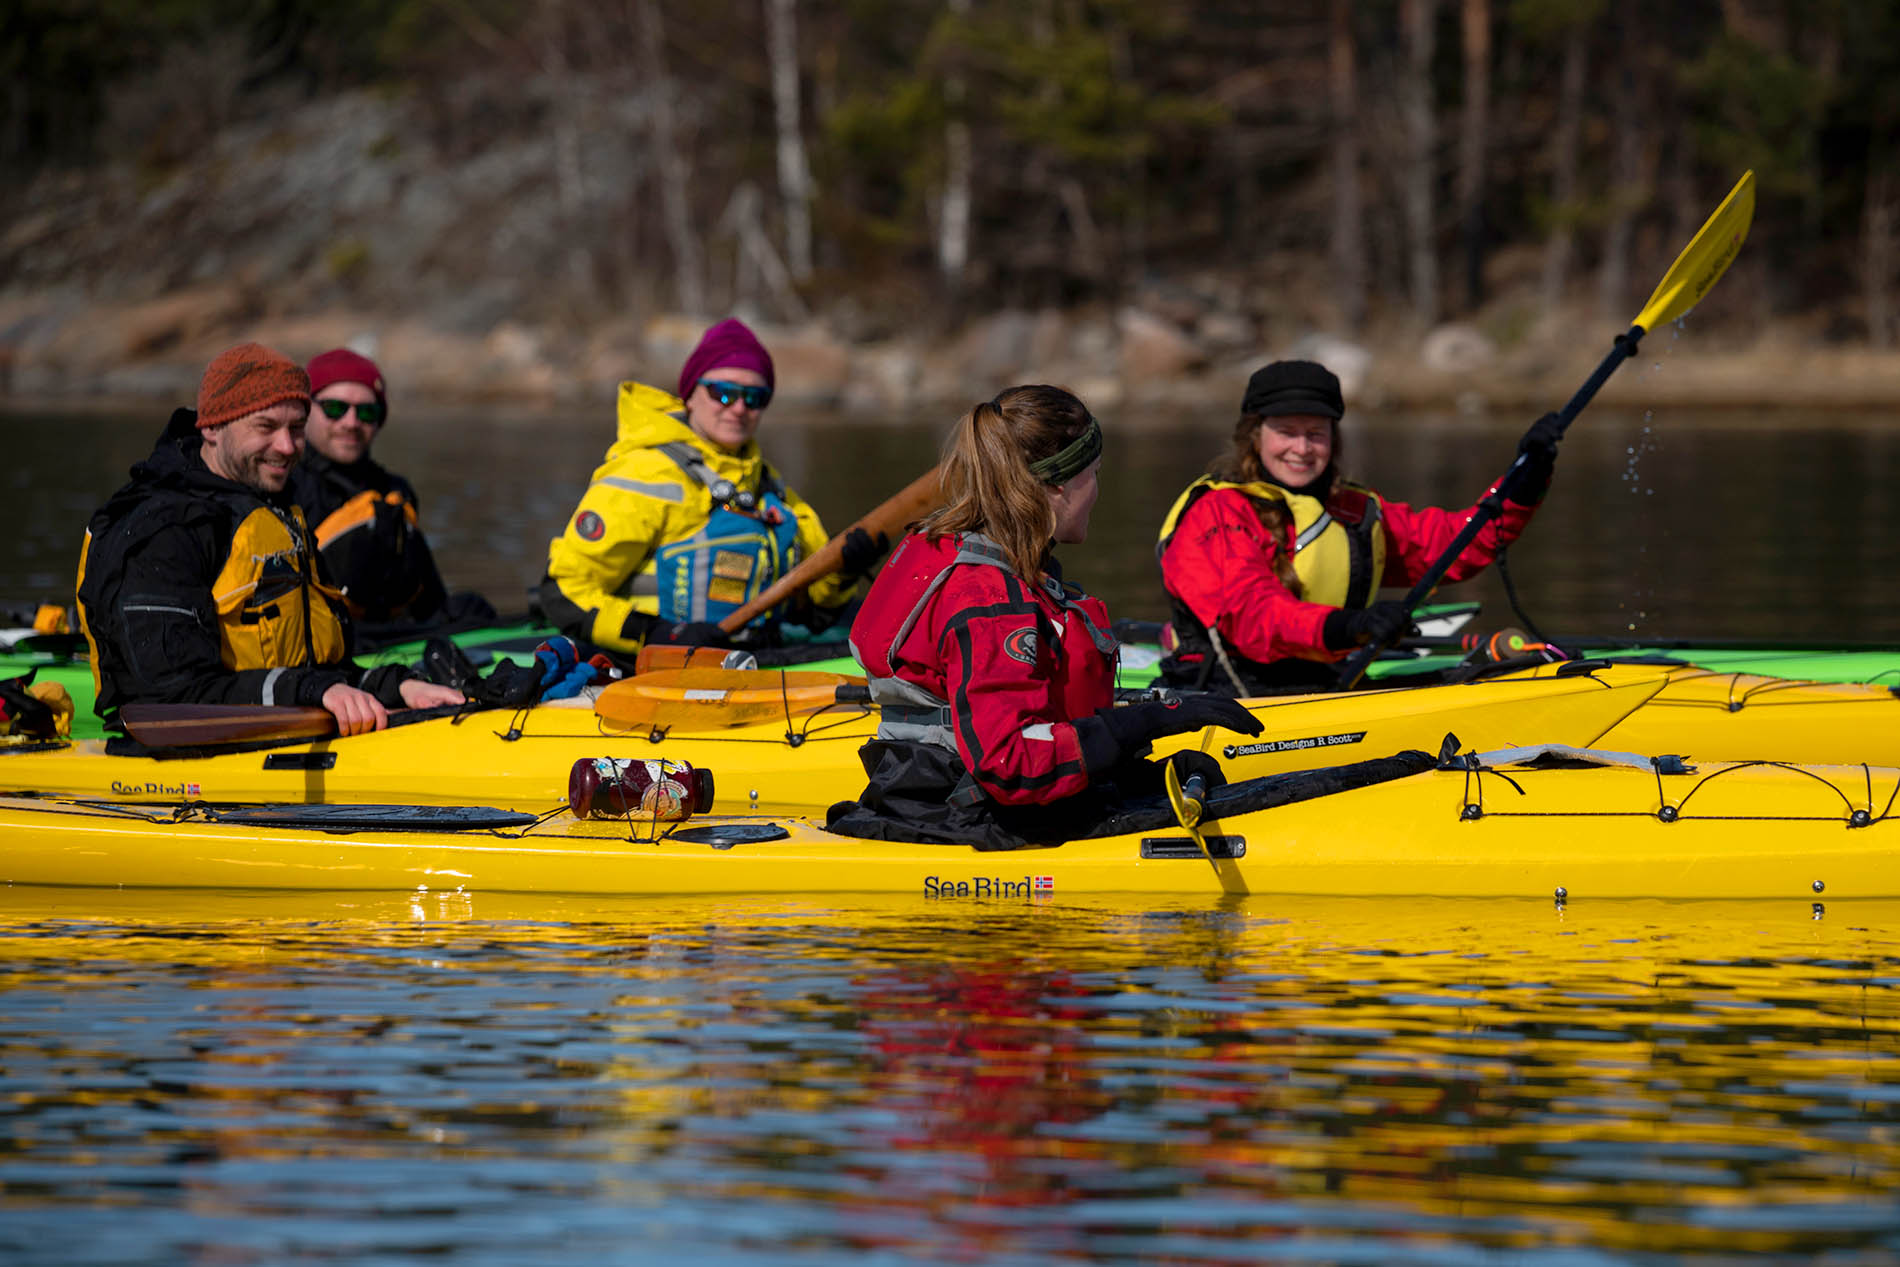 A group of people in yellow kayaks